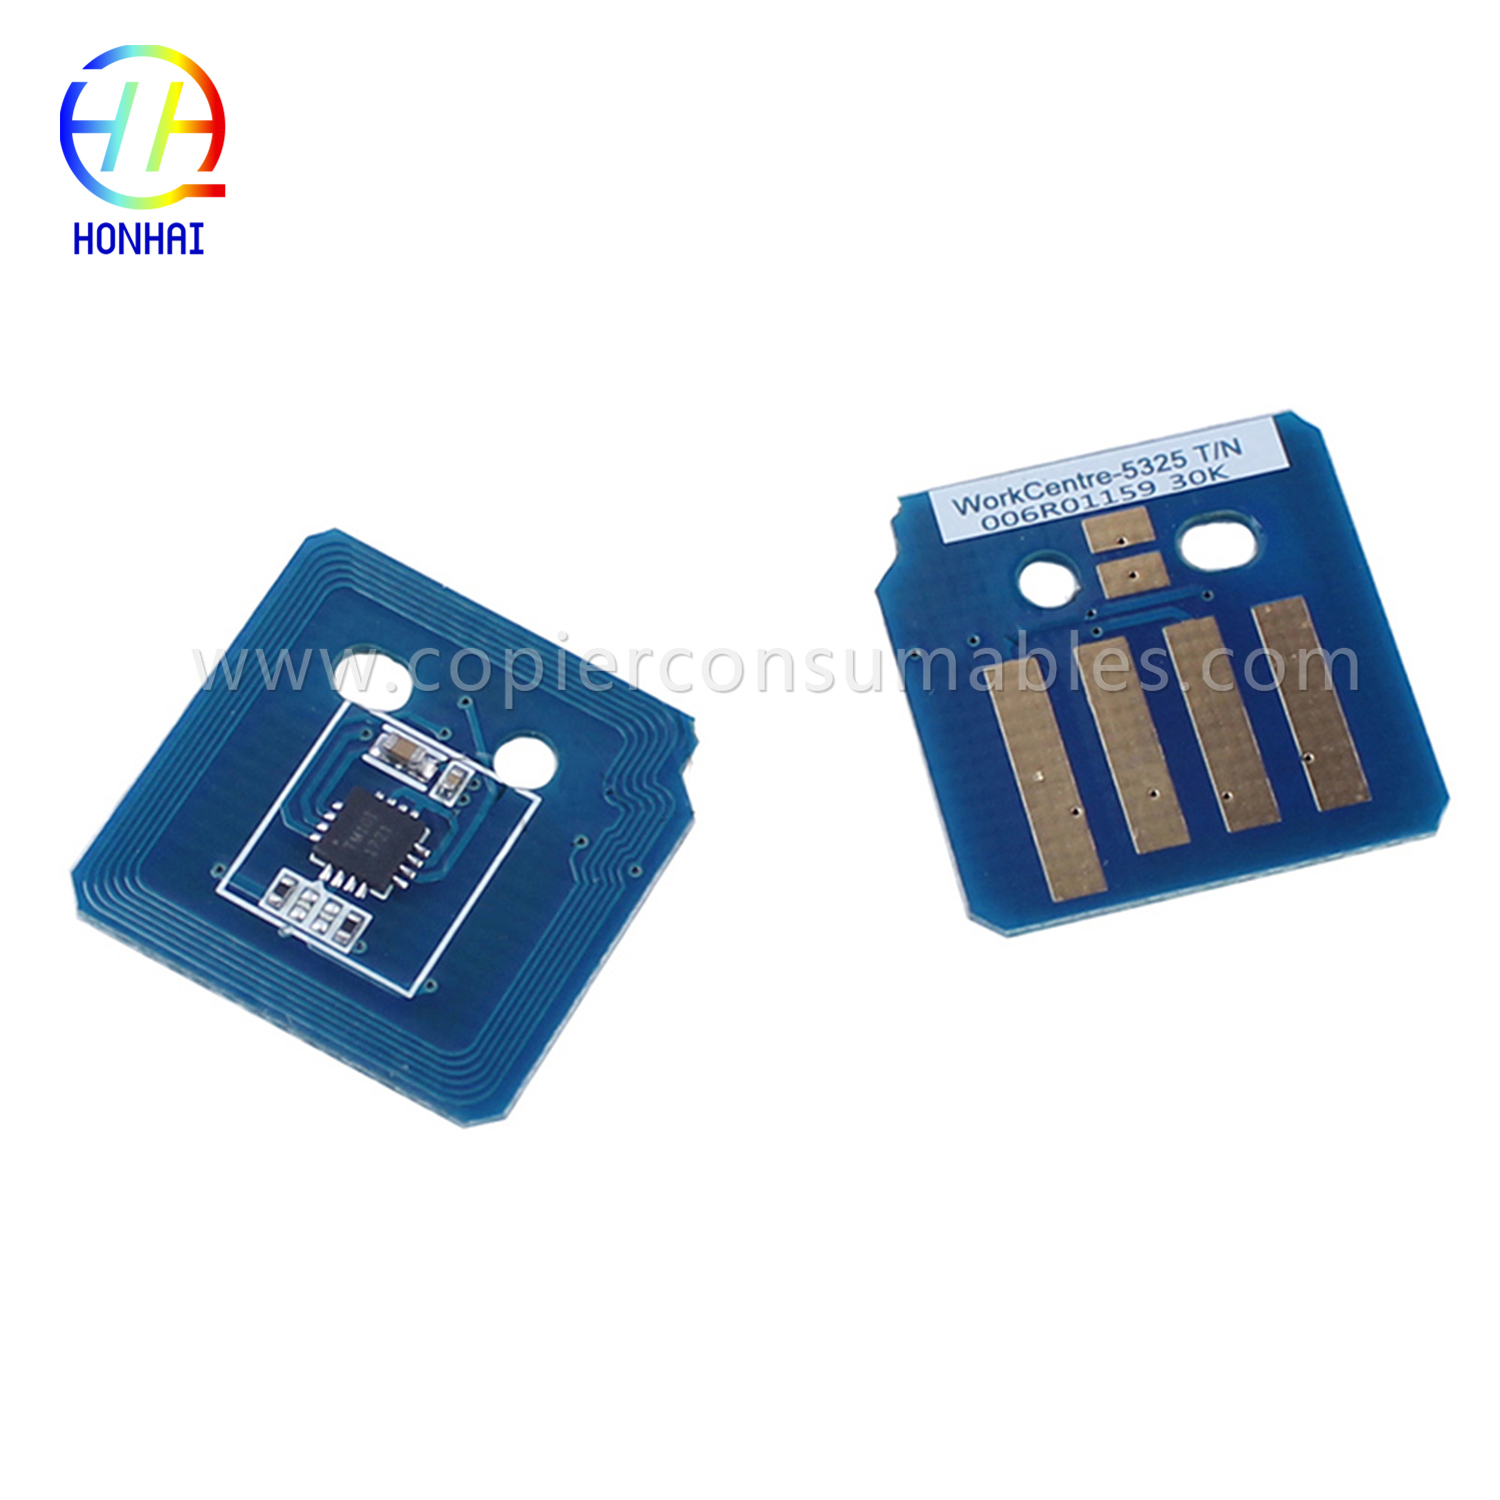 Toner Chip for Xerox Workcentre 5325 5330 5335 (006R01159 6R1159) (3) เพิ่มเติม